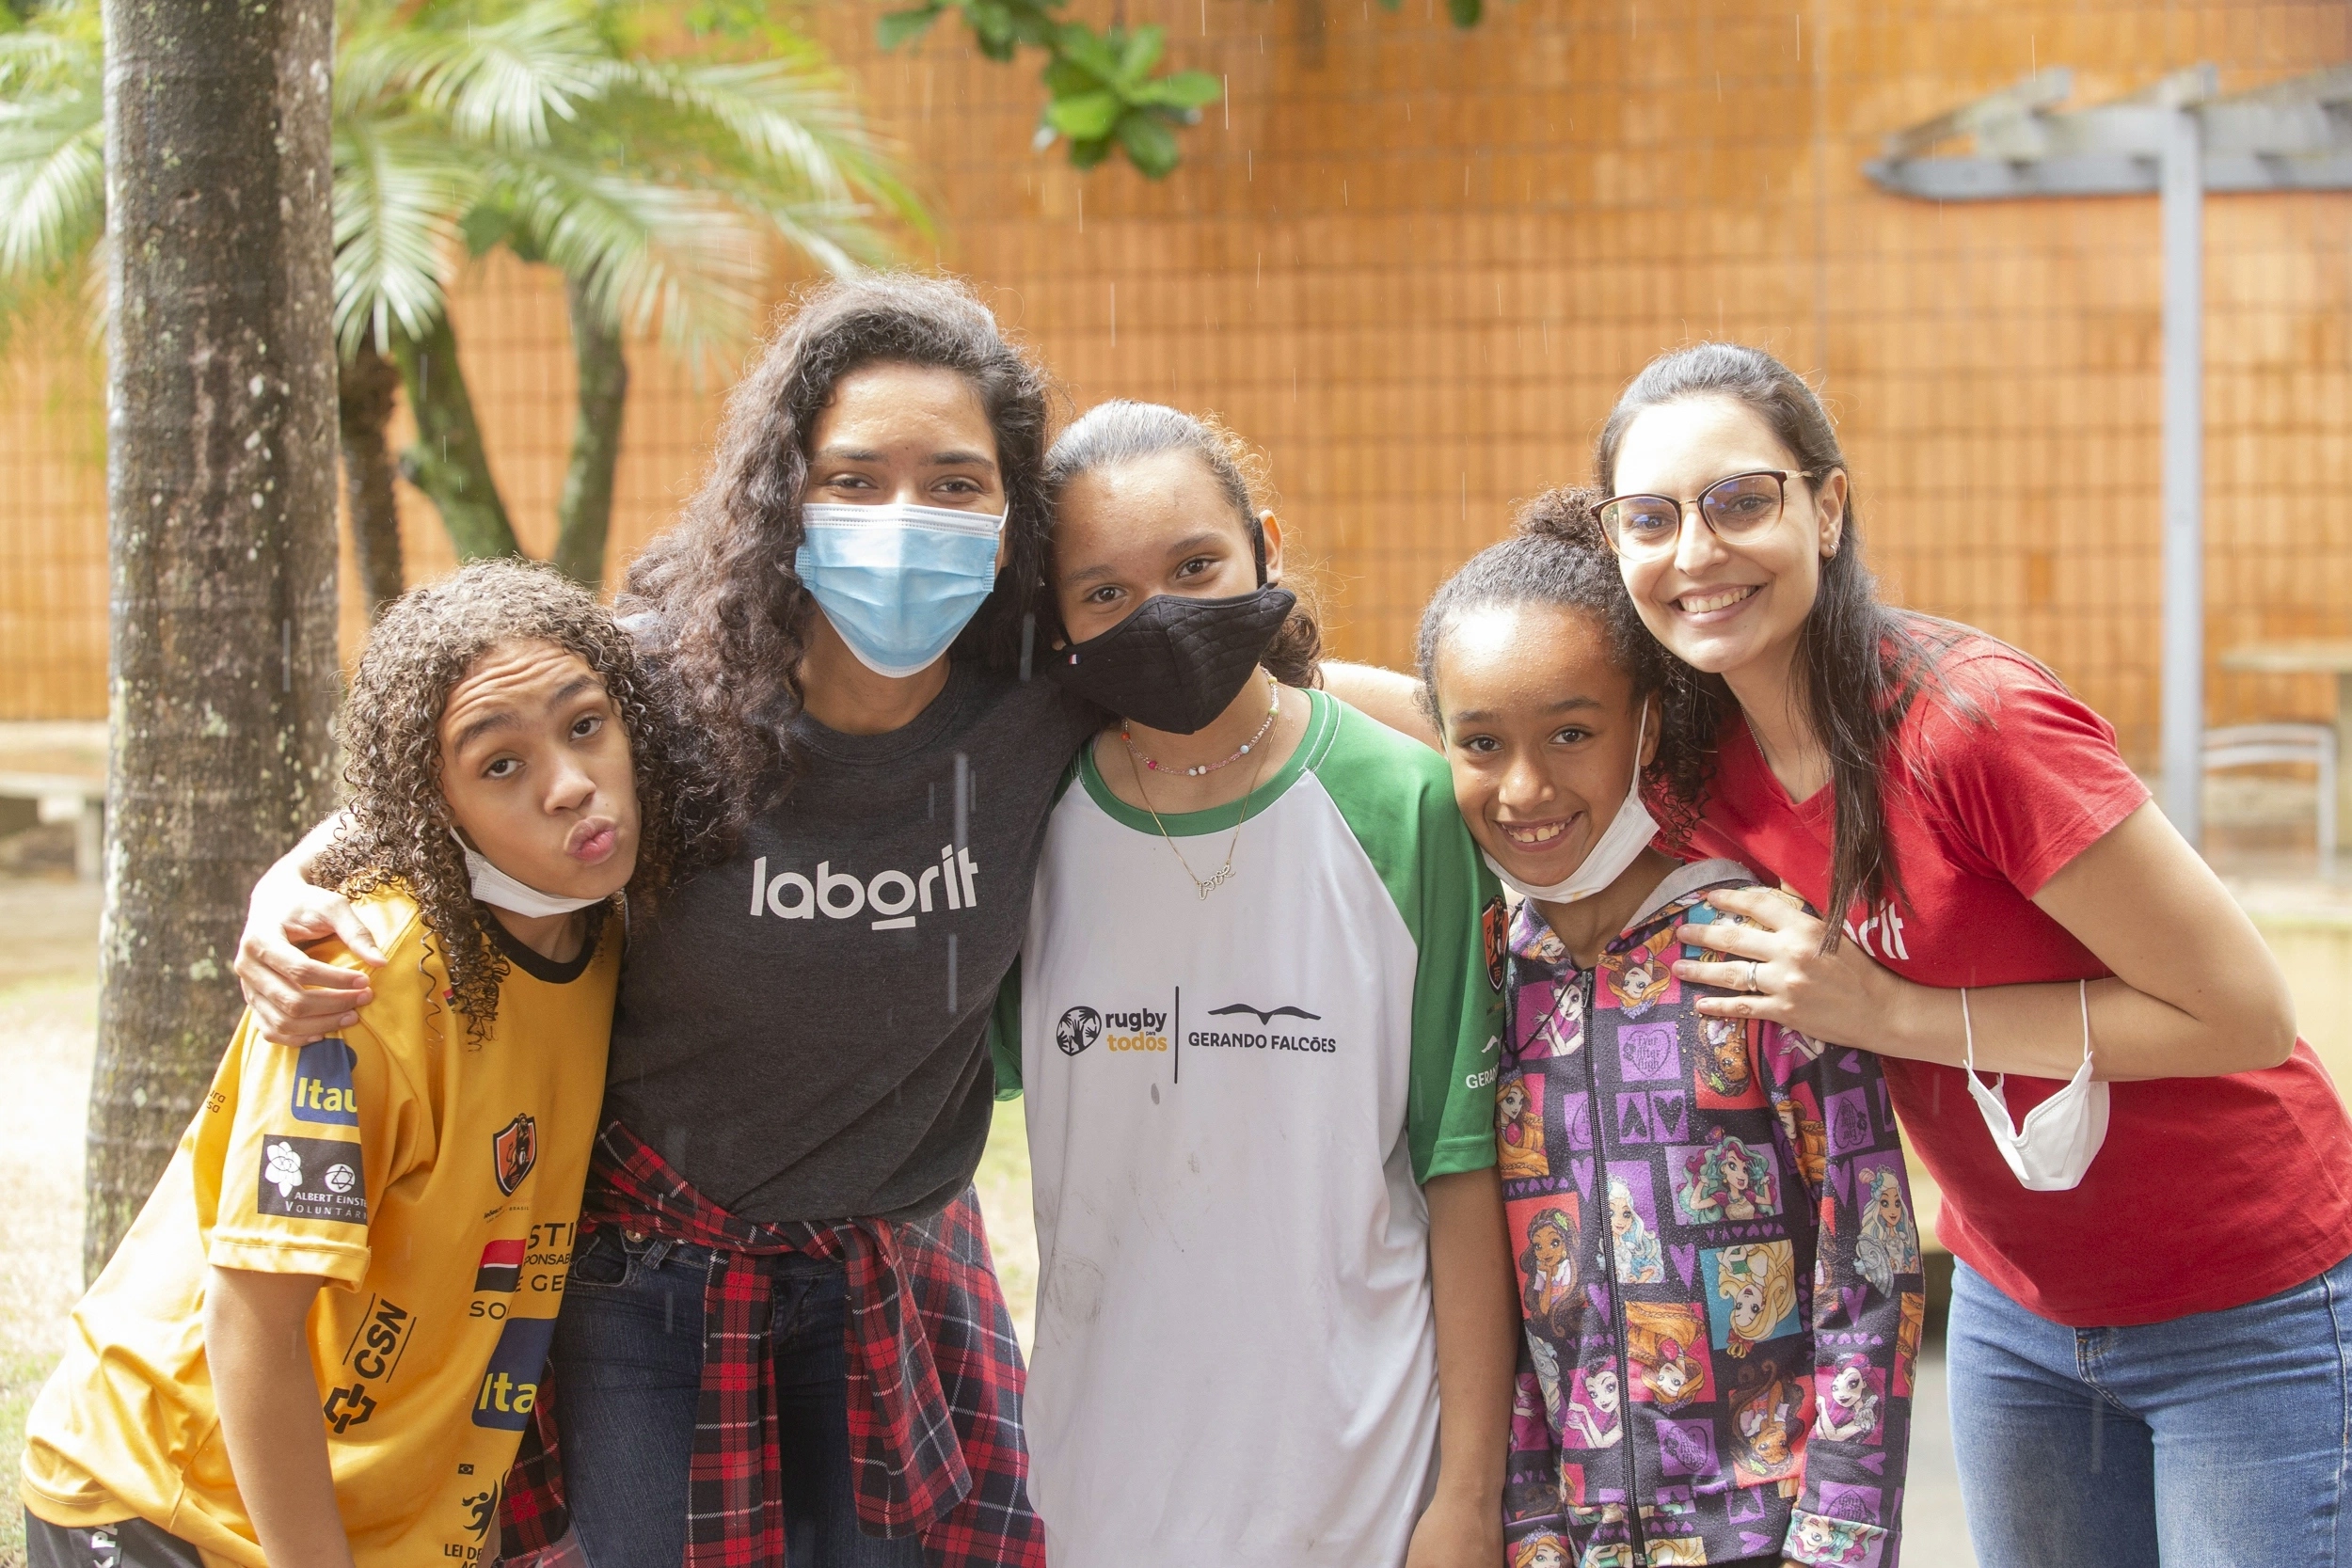 Laborit carries out social action with children in São Paulo